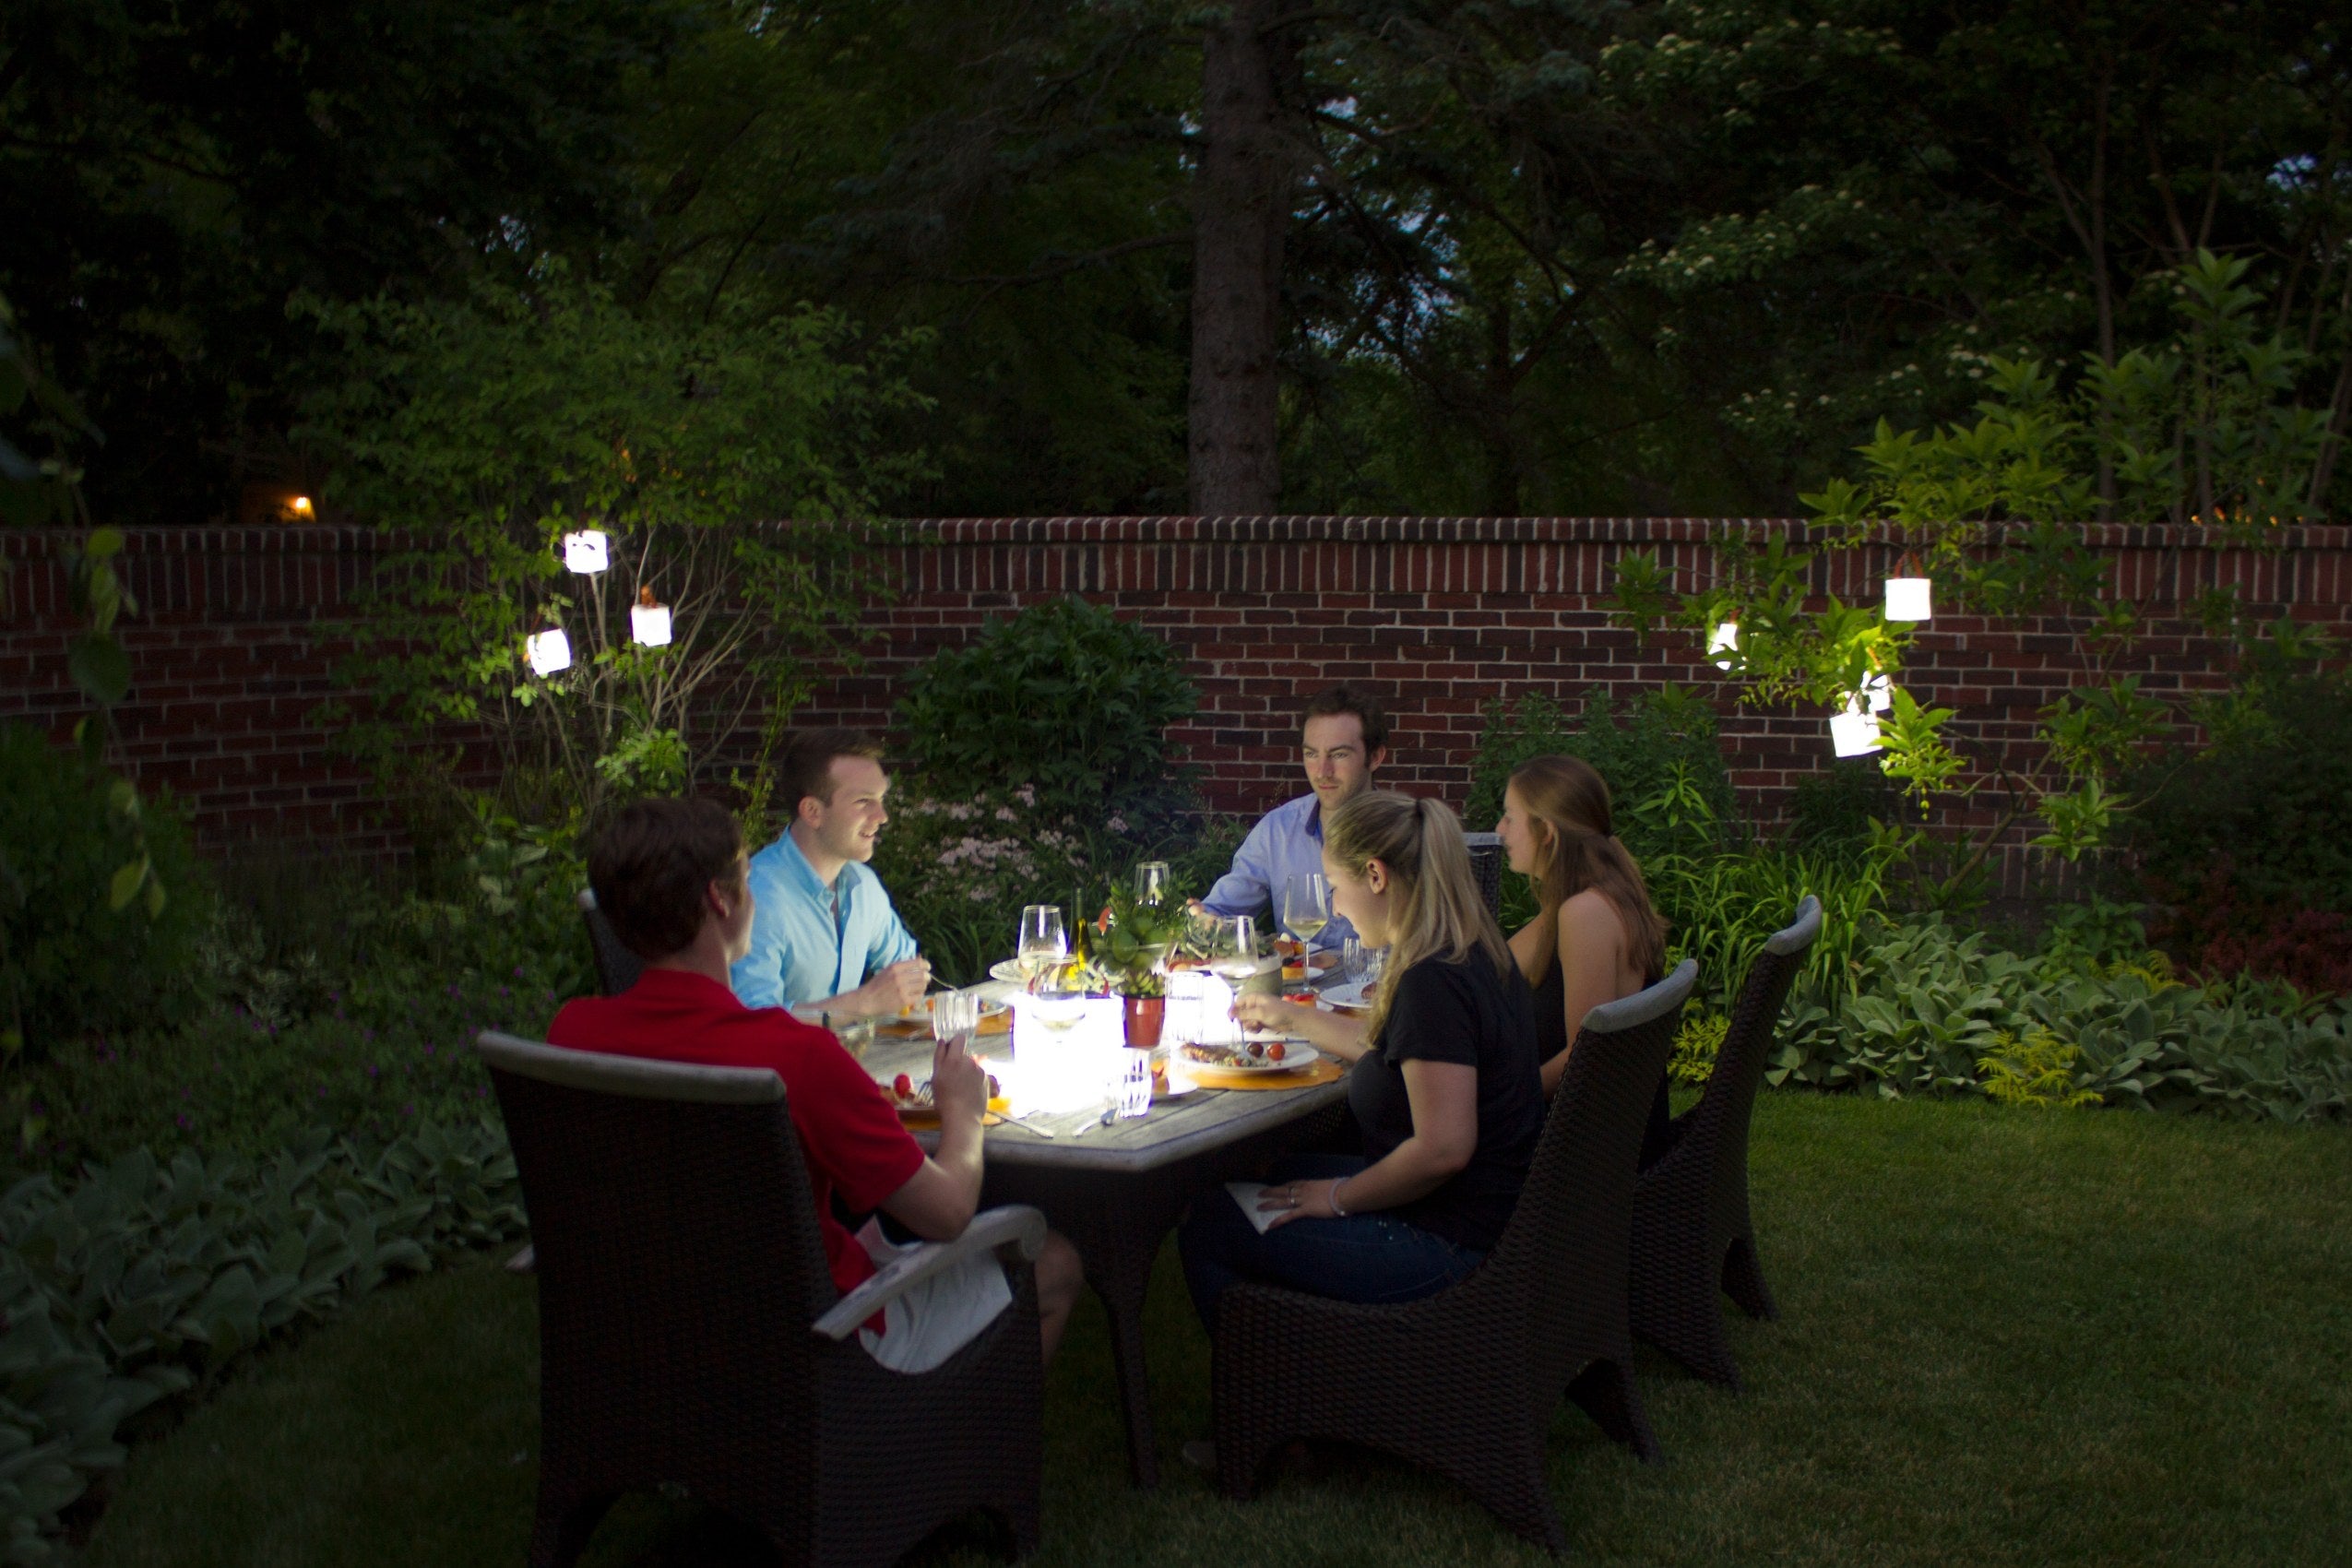 Friends enjoying a meal together in a backyard. Source: Hubbard Woods